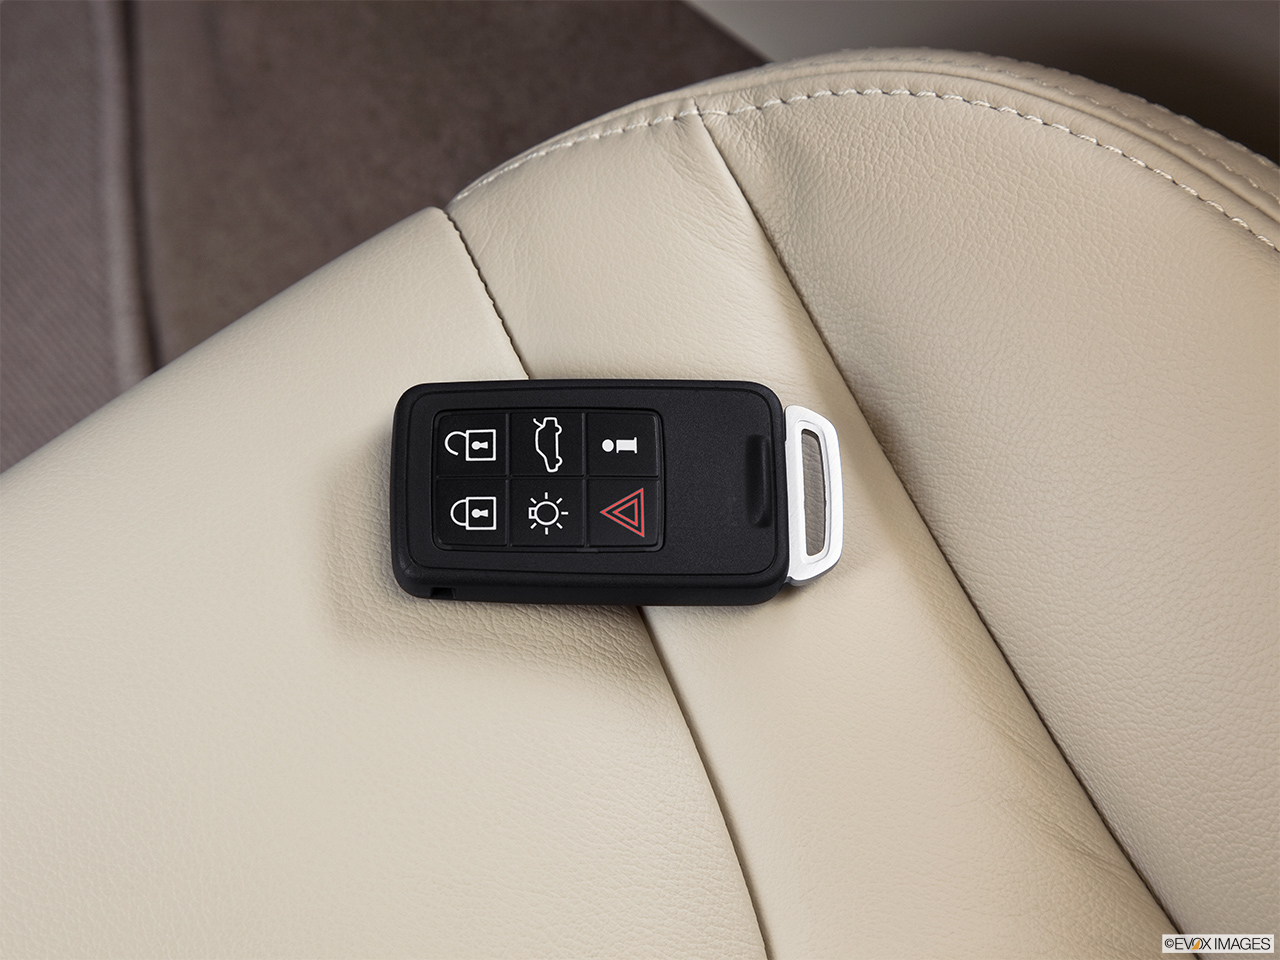 2013 Volvo S60 T5 FWD Premier Key fob on driver's seat. 